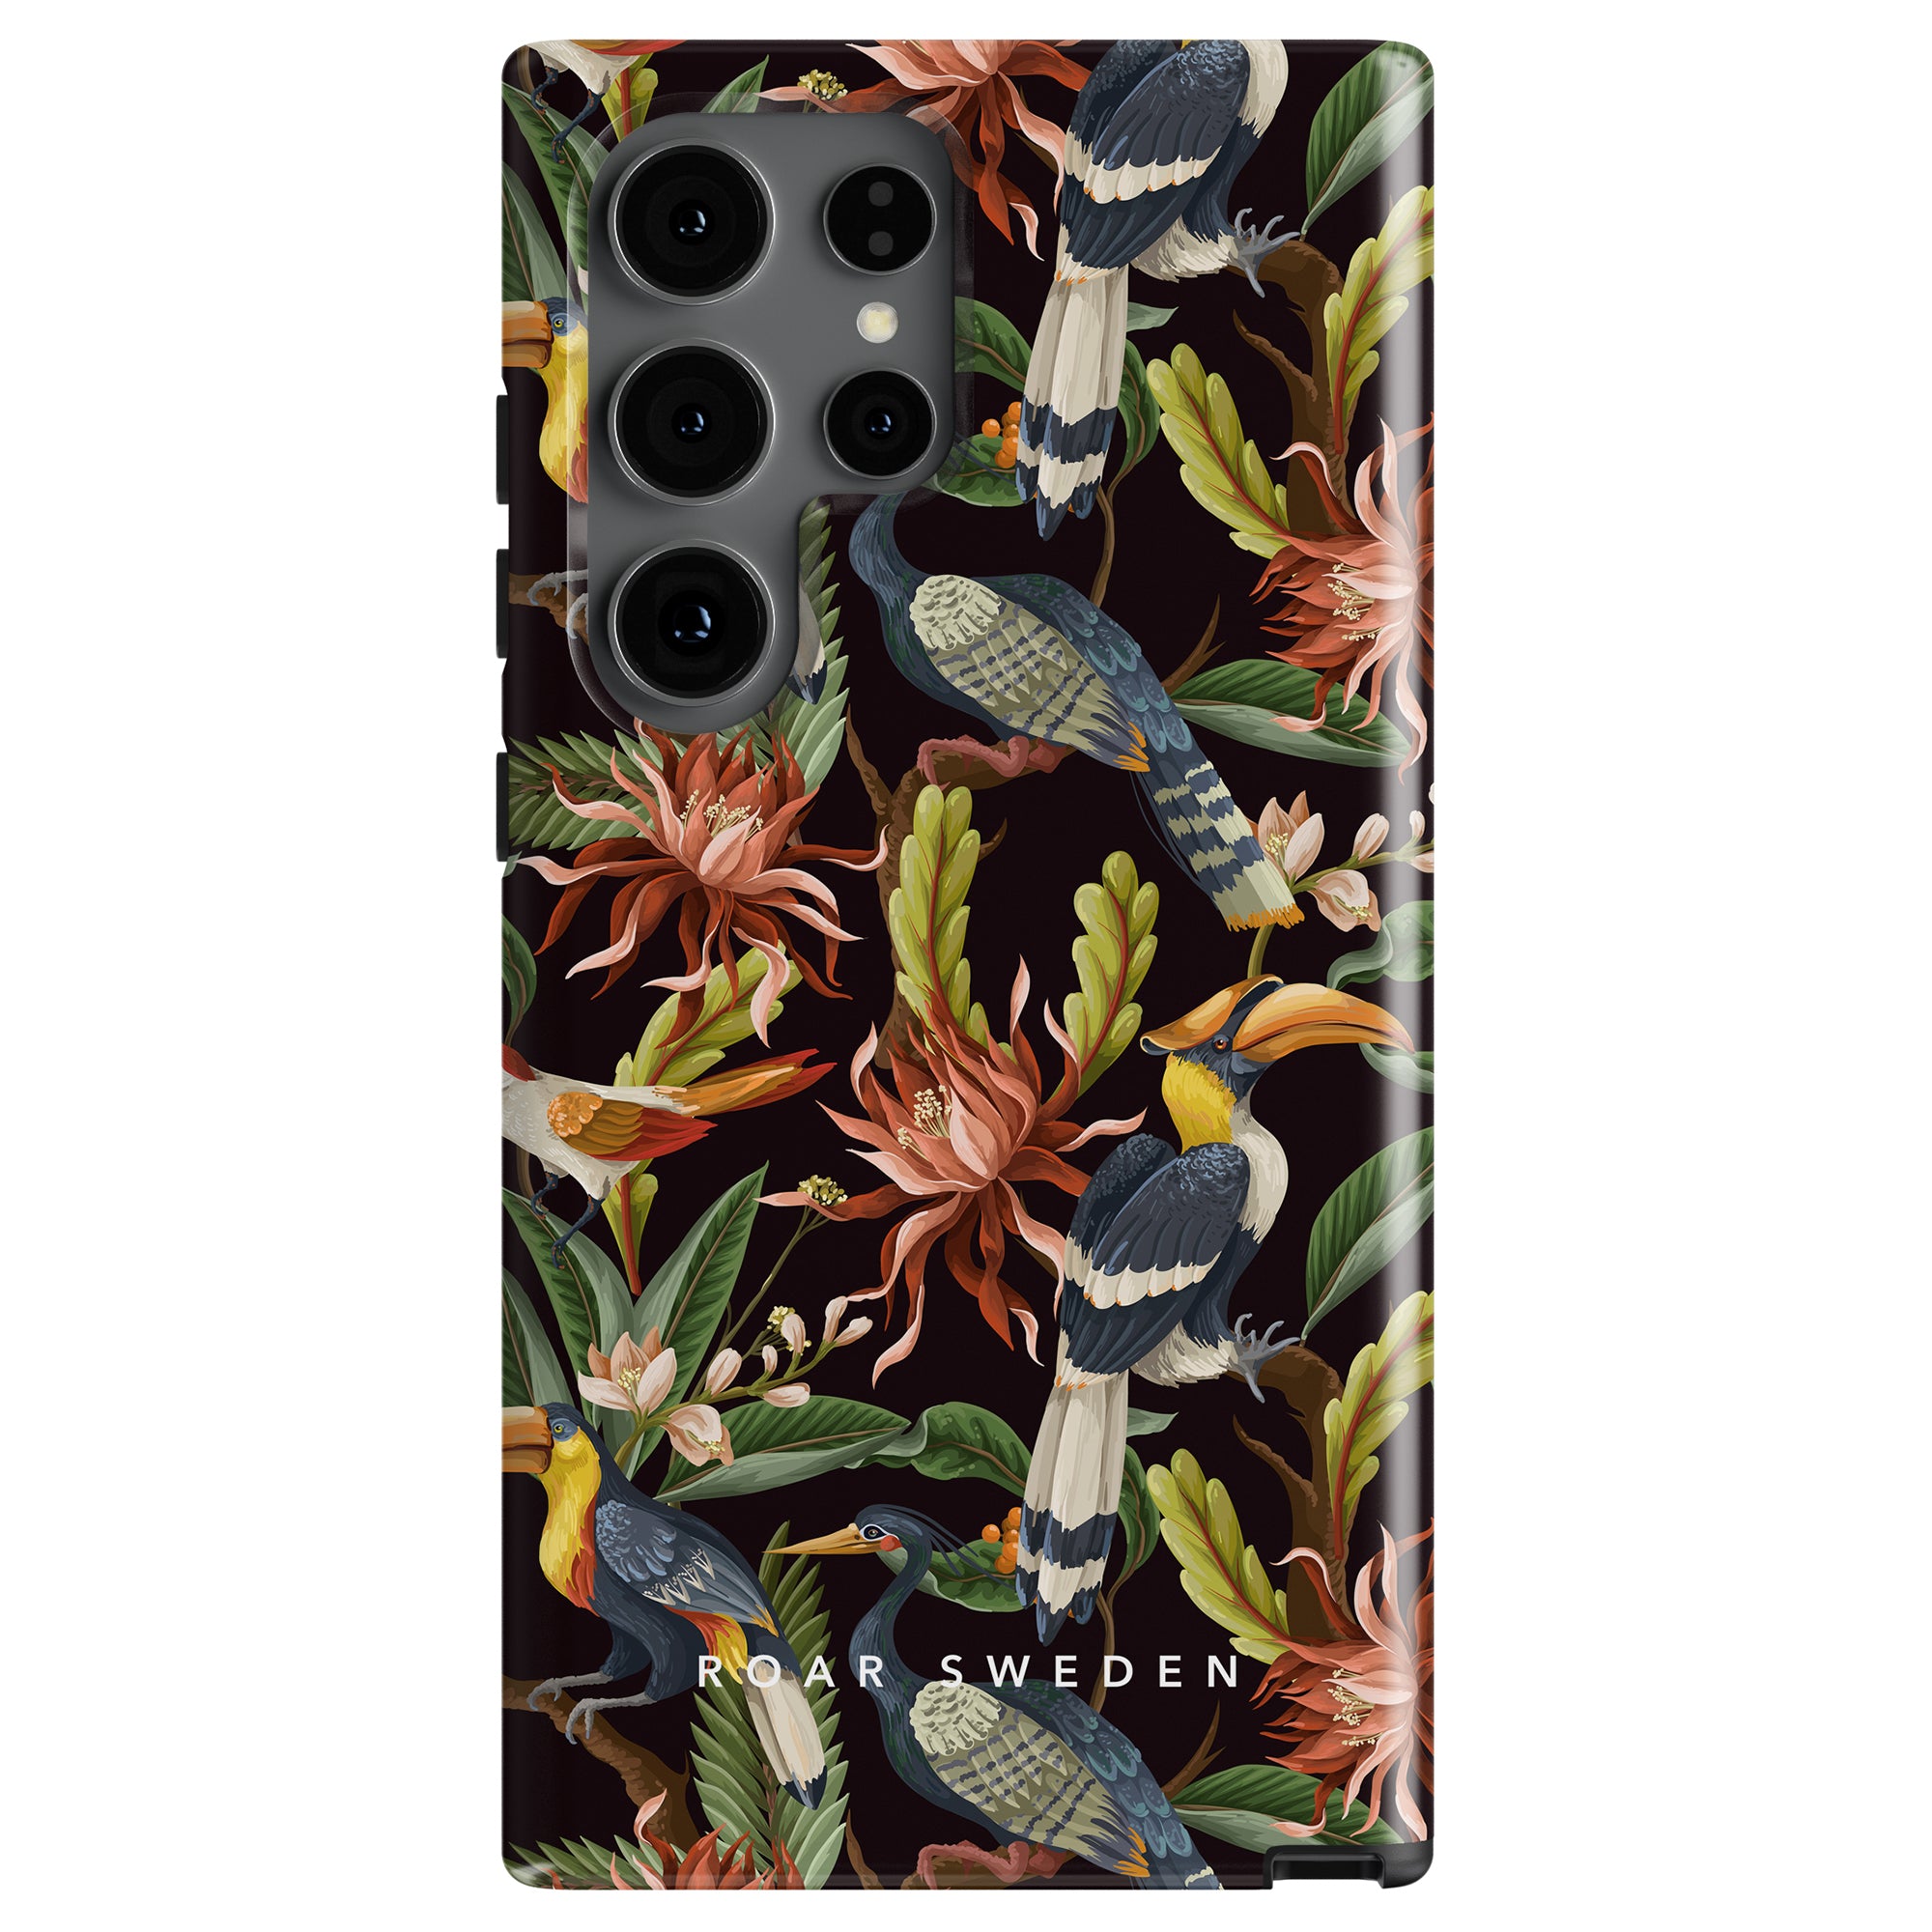 Smartphone with a colorful floral and bird print case, featuring the text "ROAR SWEDEN" on the bottom. This robust Toucan - Tough Case showcases a naturinspirerad stil that adds a touch of nature to your device.